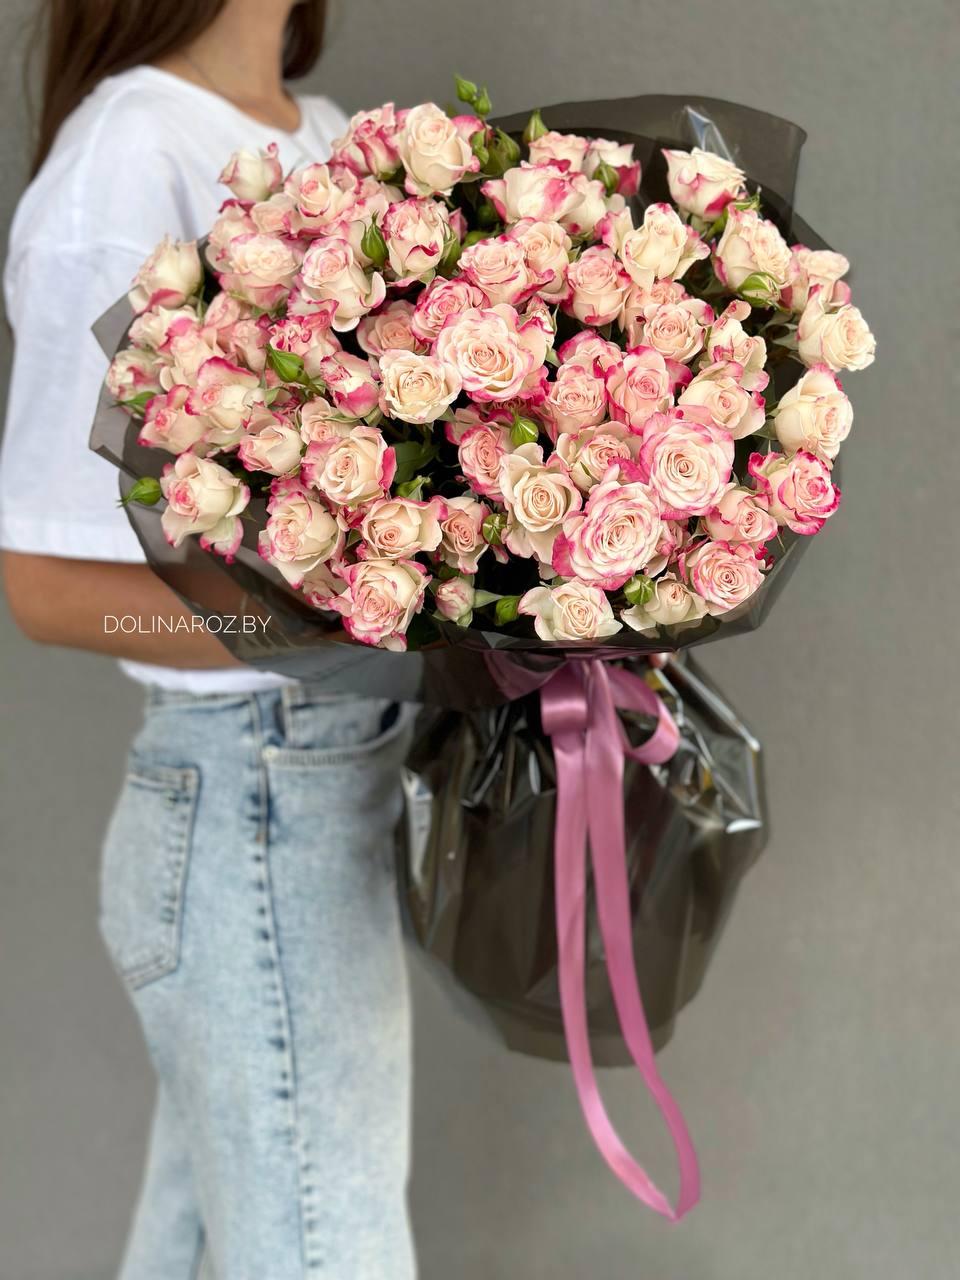 Bouquet of roses "Lana"